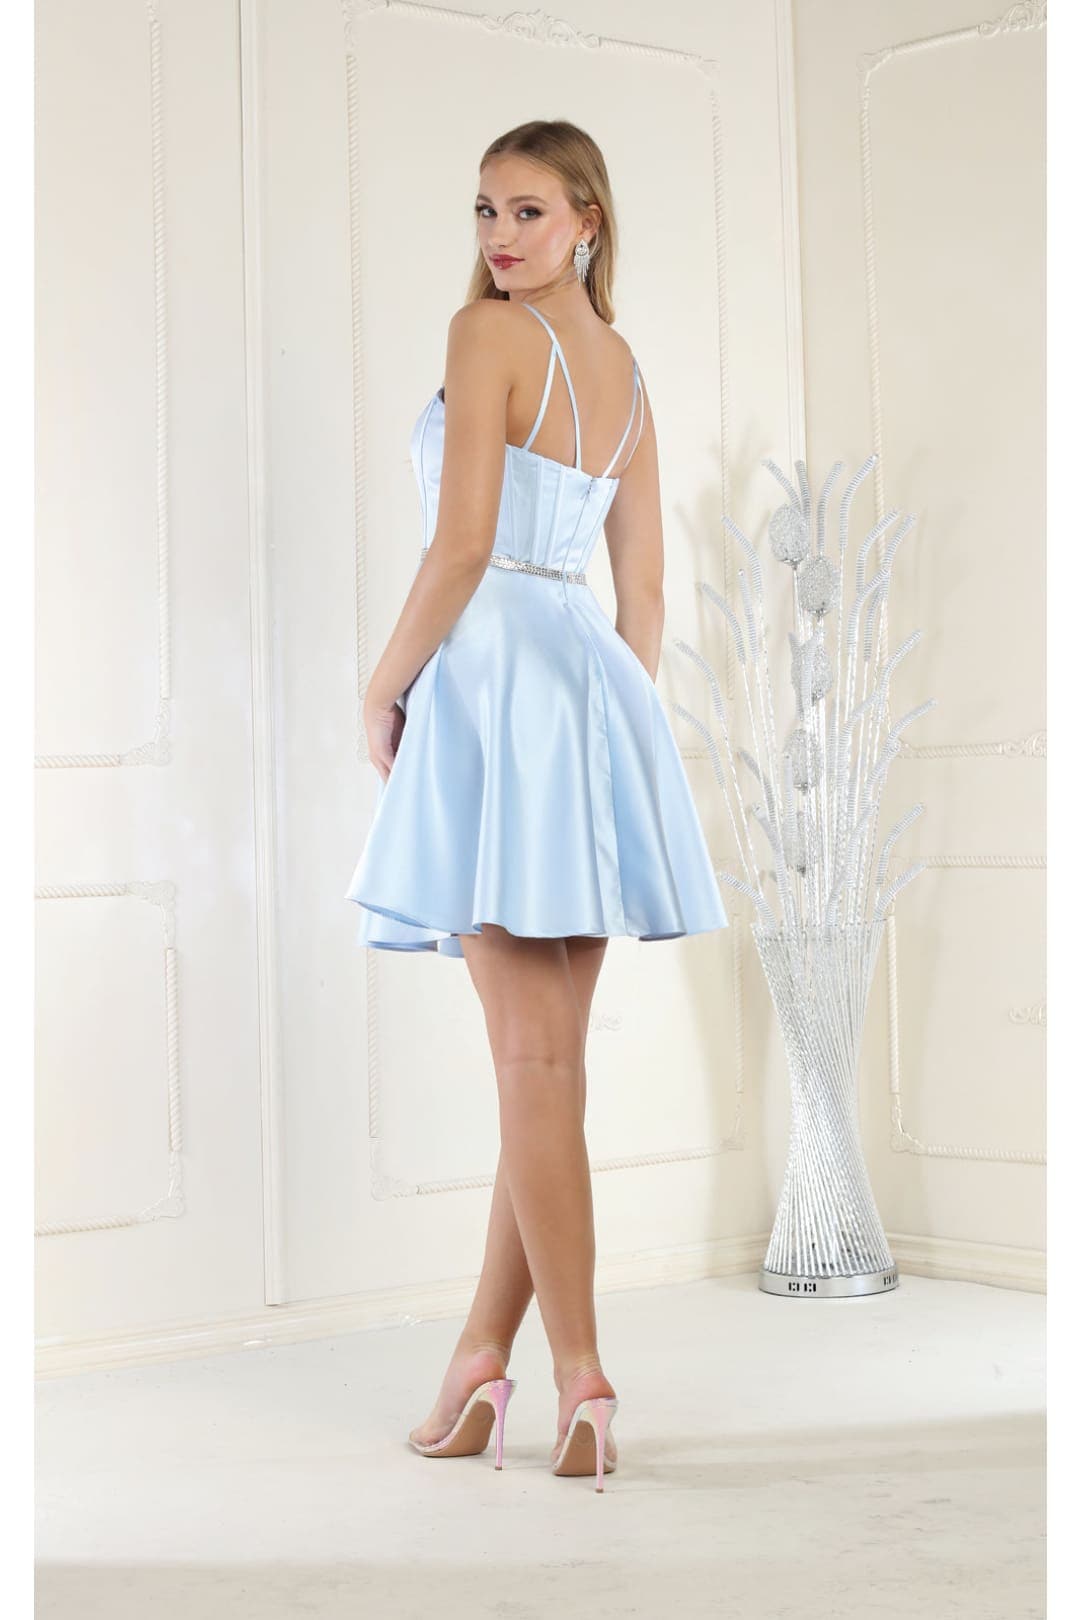 May Queen MQ1864 A Line Short Sweetheart Cocktail Dress